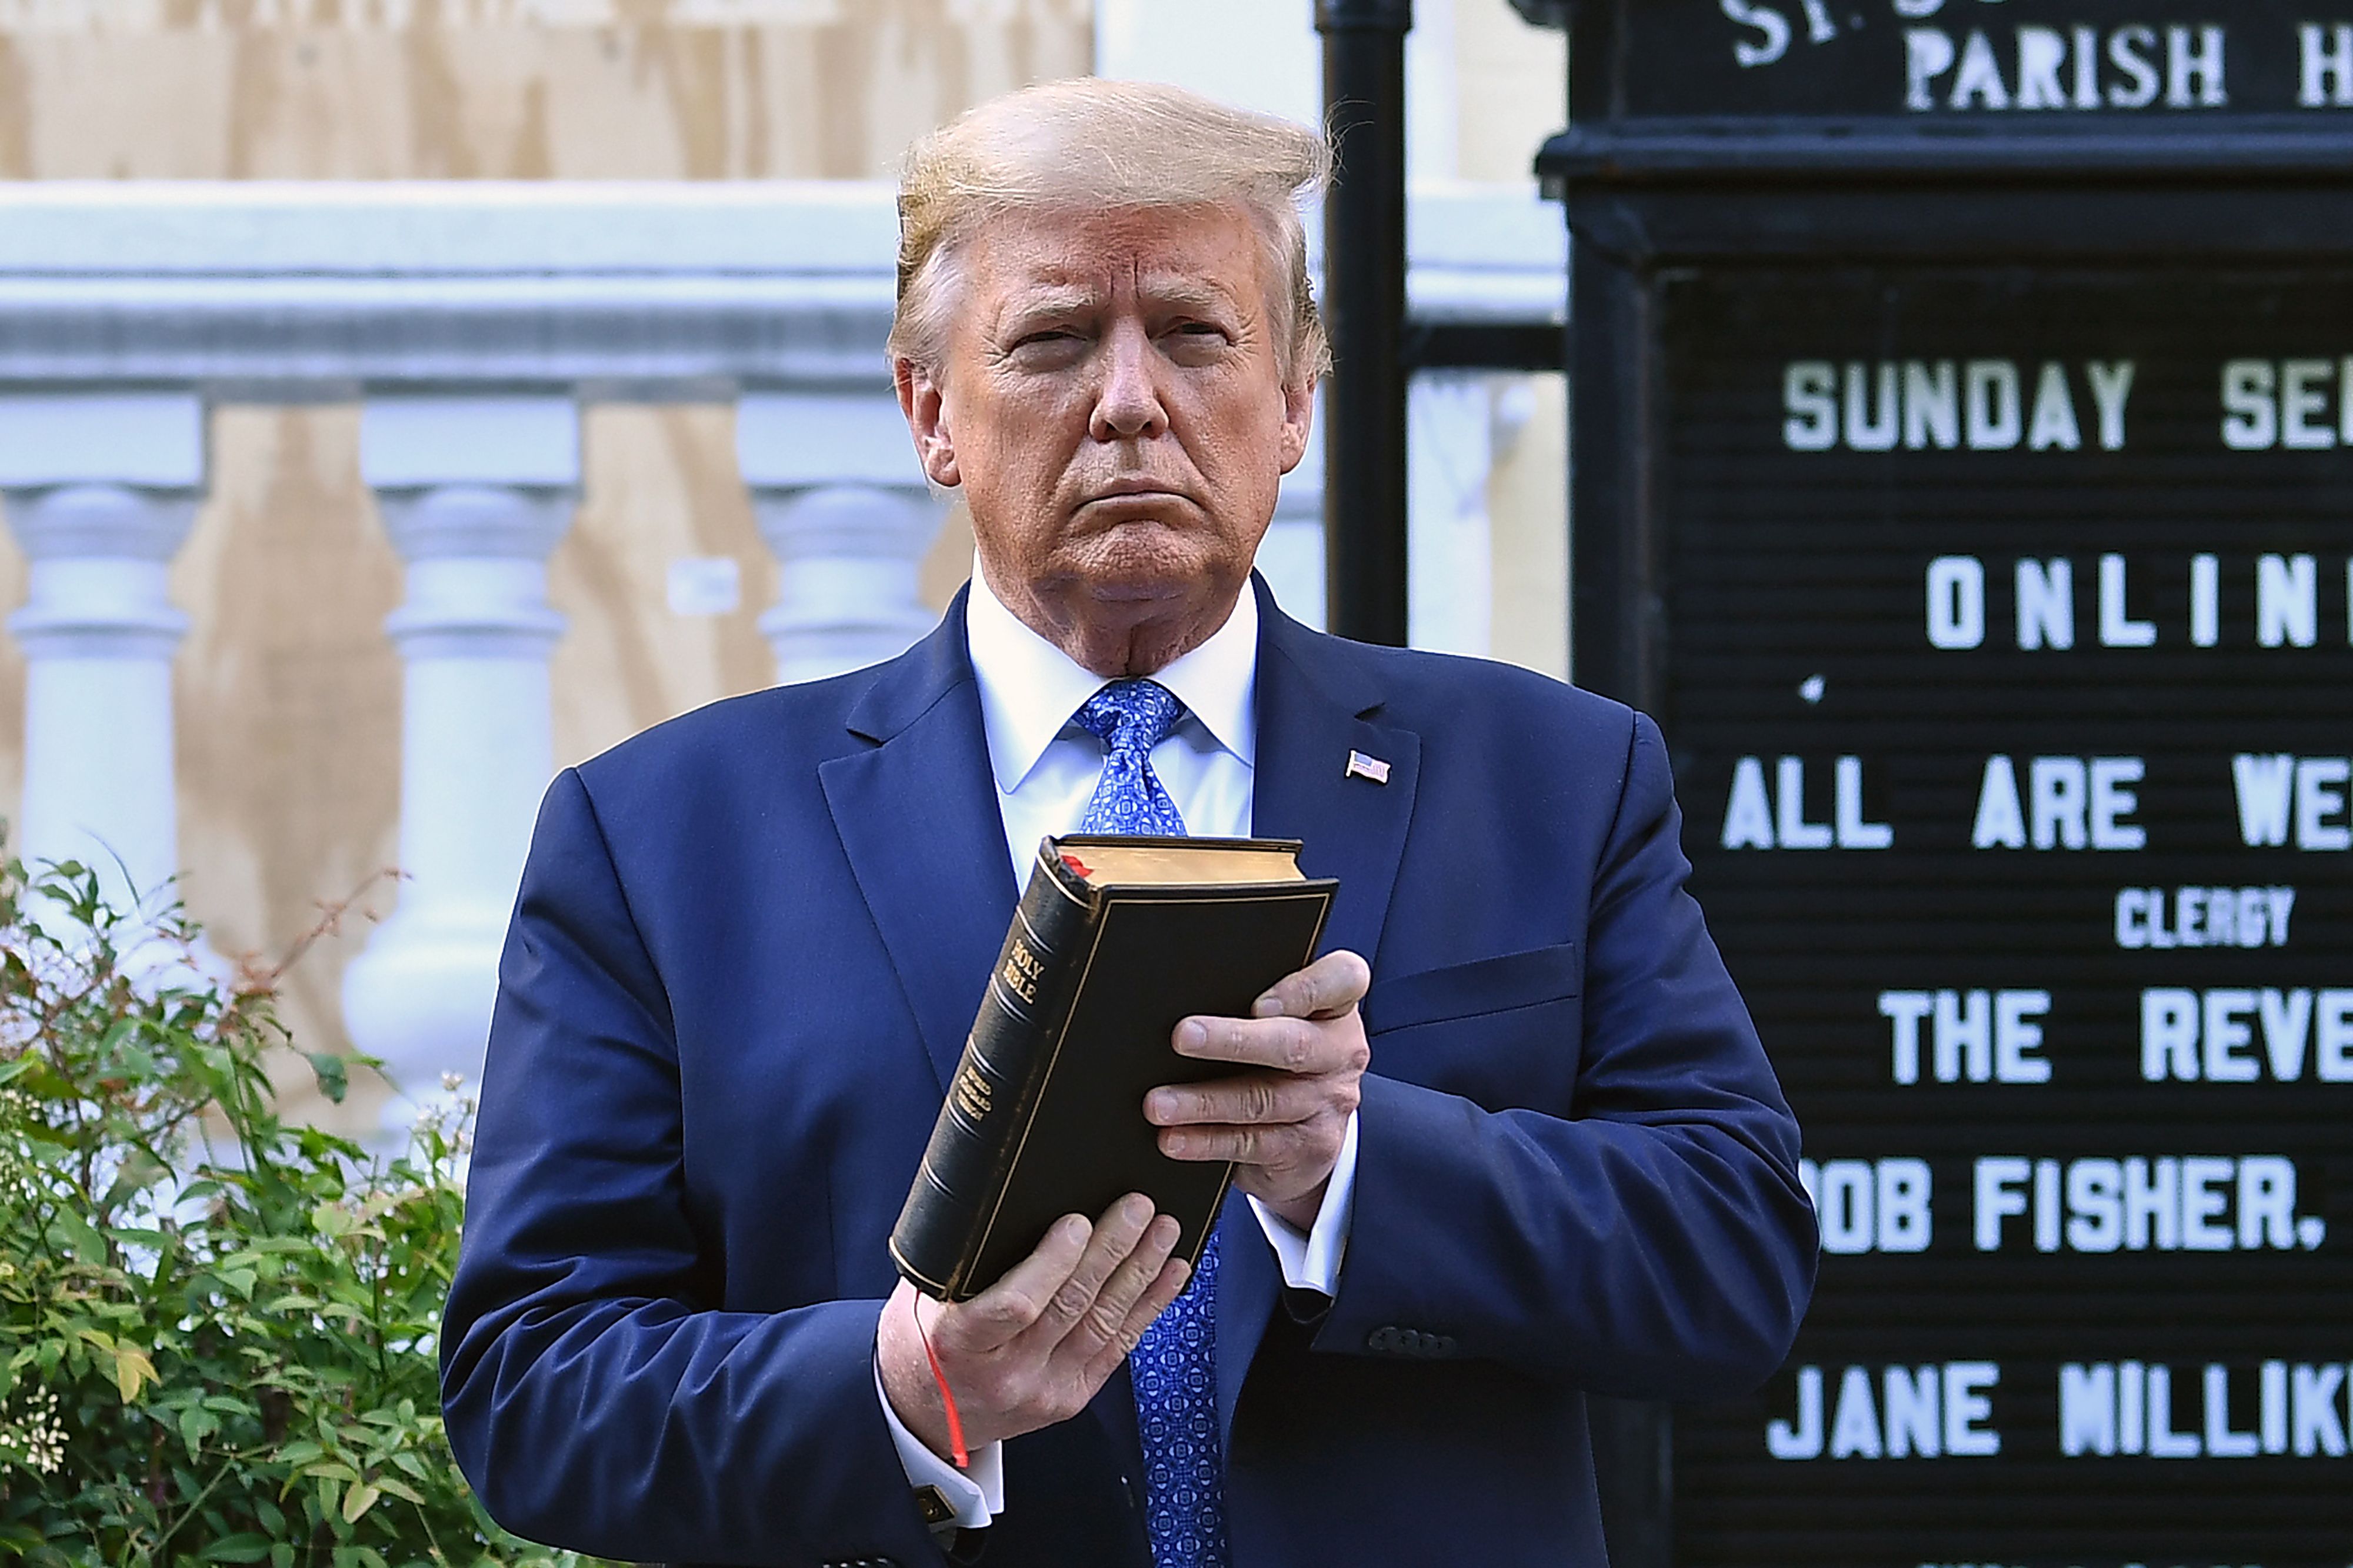 Trump’s $60 Bible pitch not just ‘ridiculous’ but a threat to Black and marginalized communities, critics caution